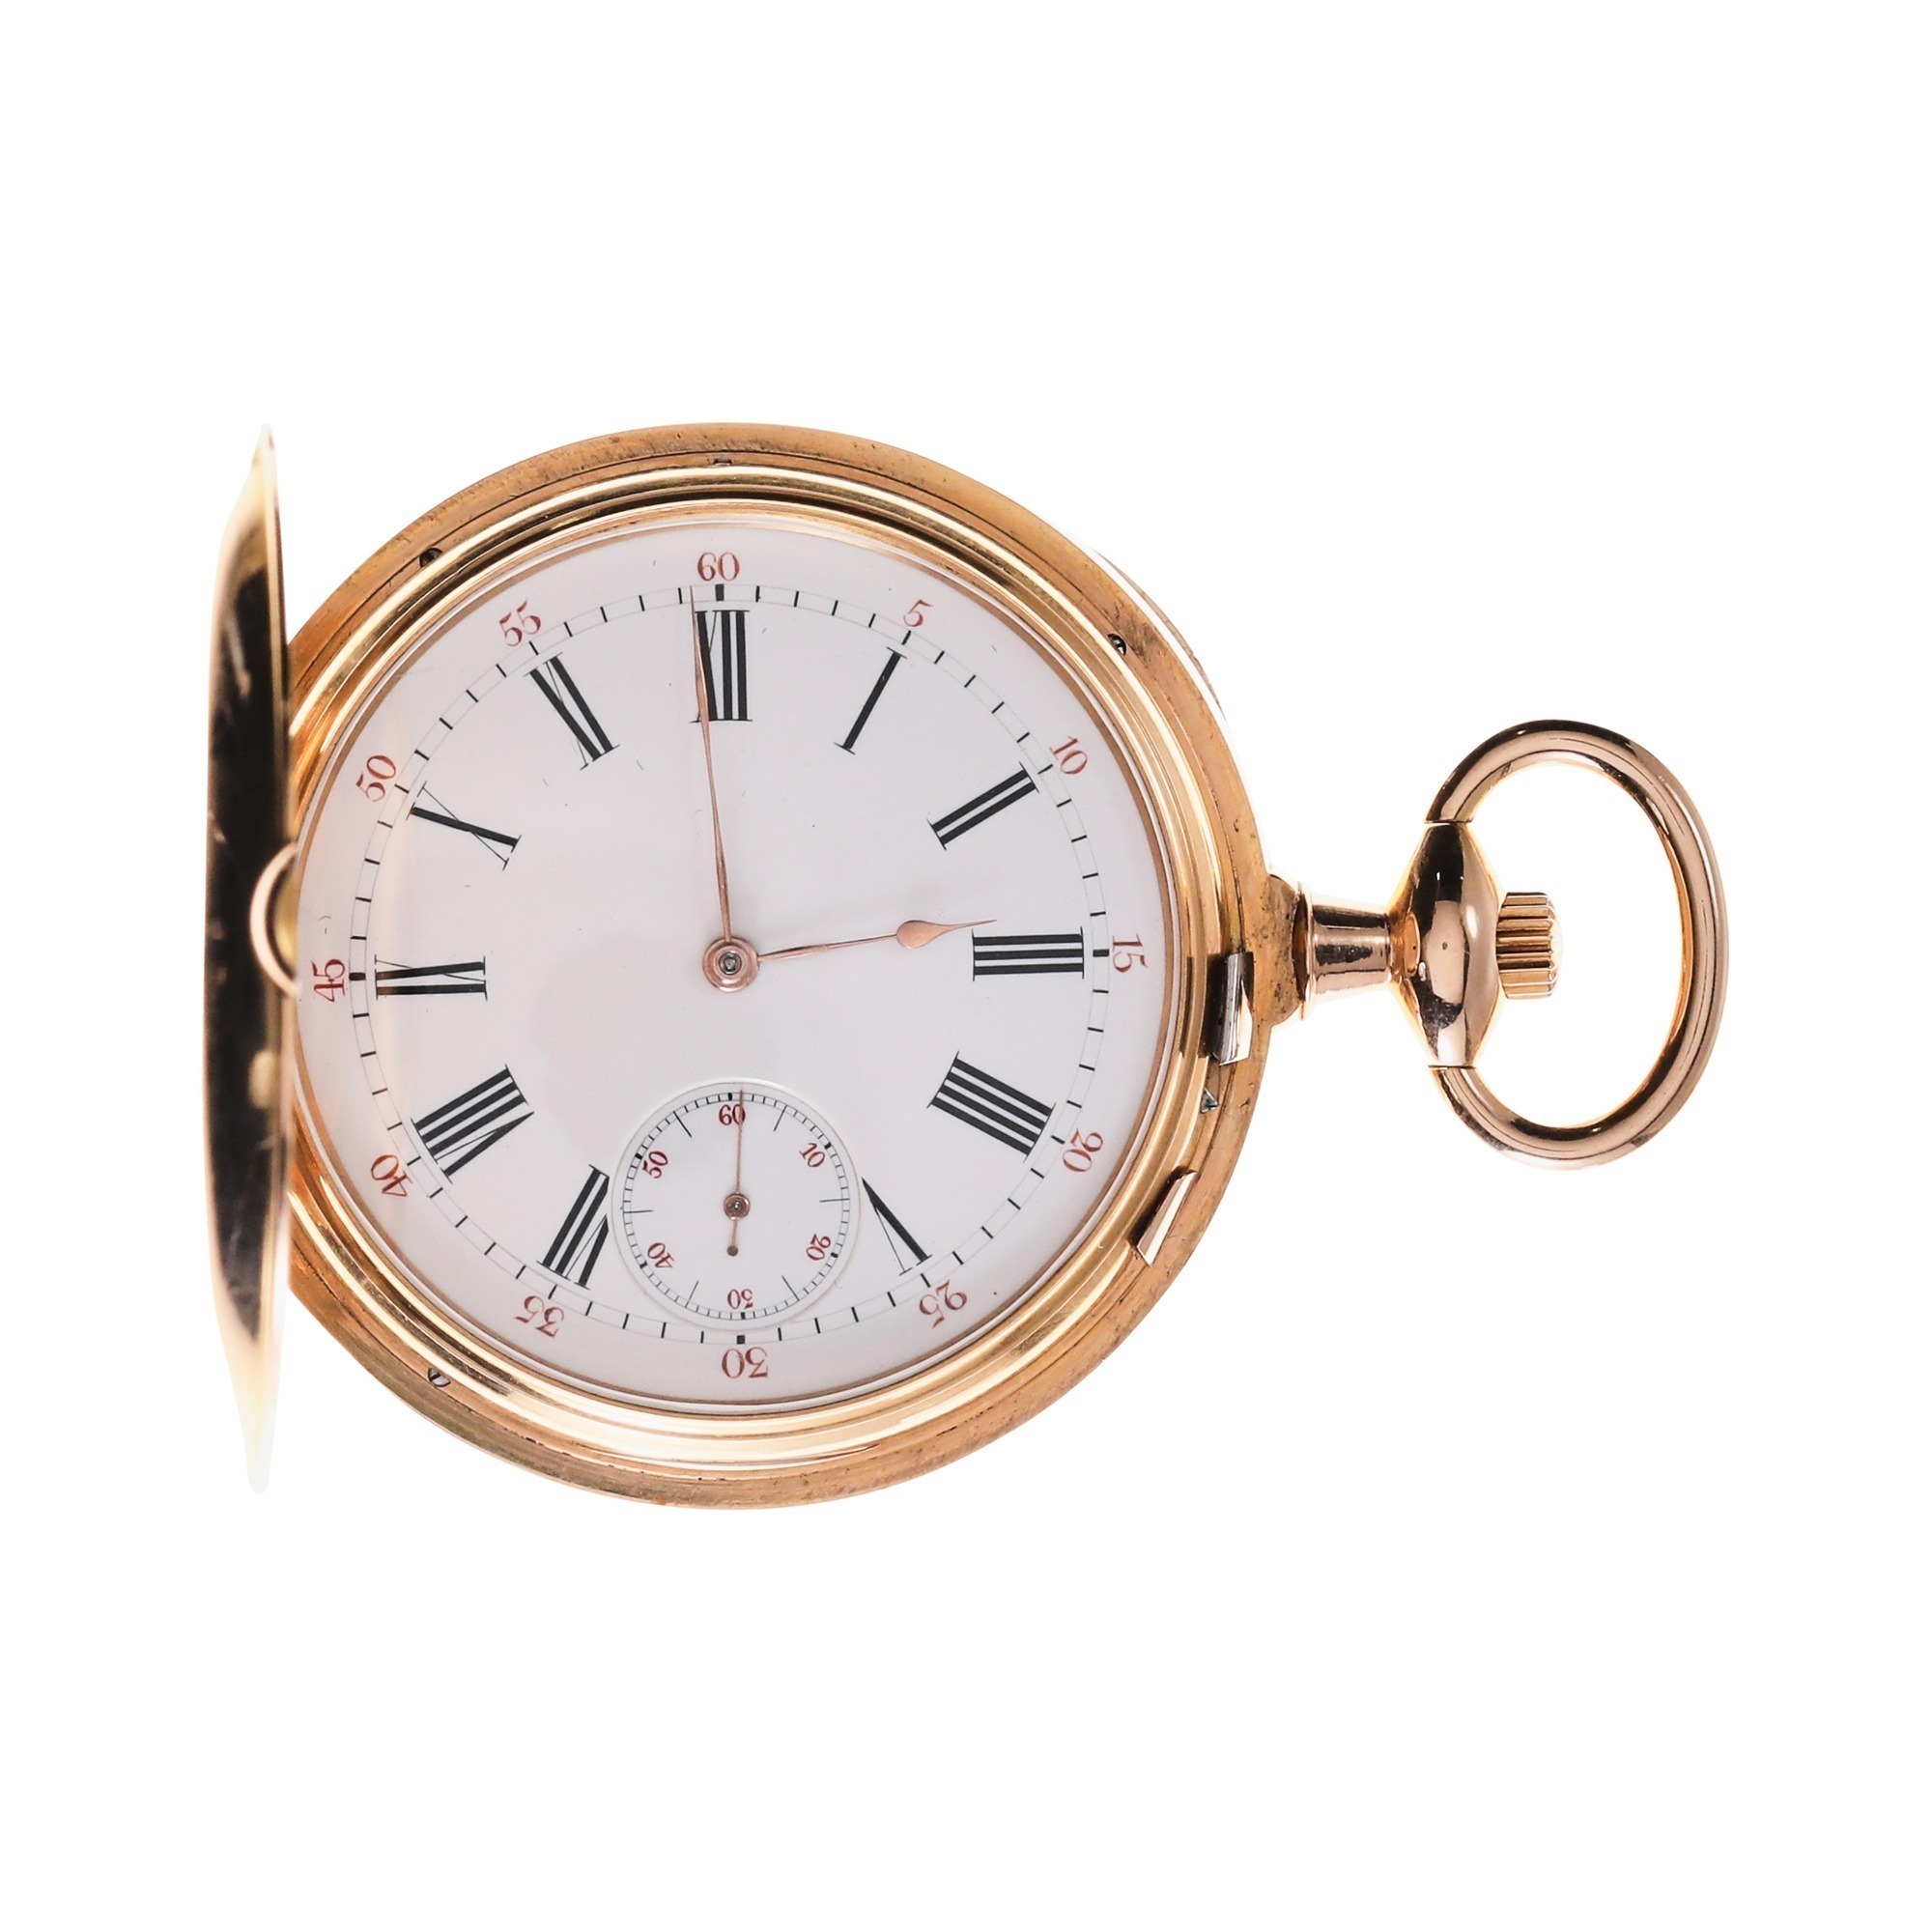 B. Haas 18k Gold Cover Winding Hunting Case Pocket Watch